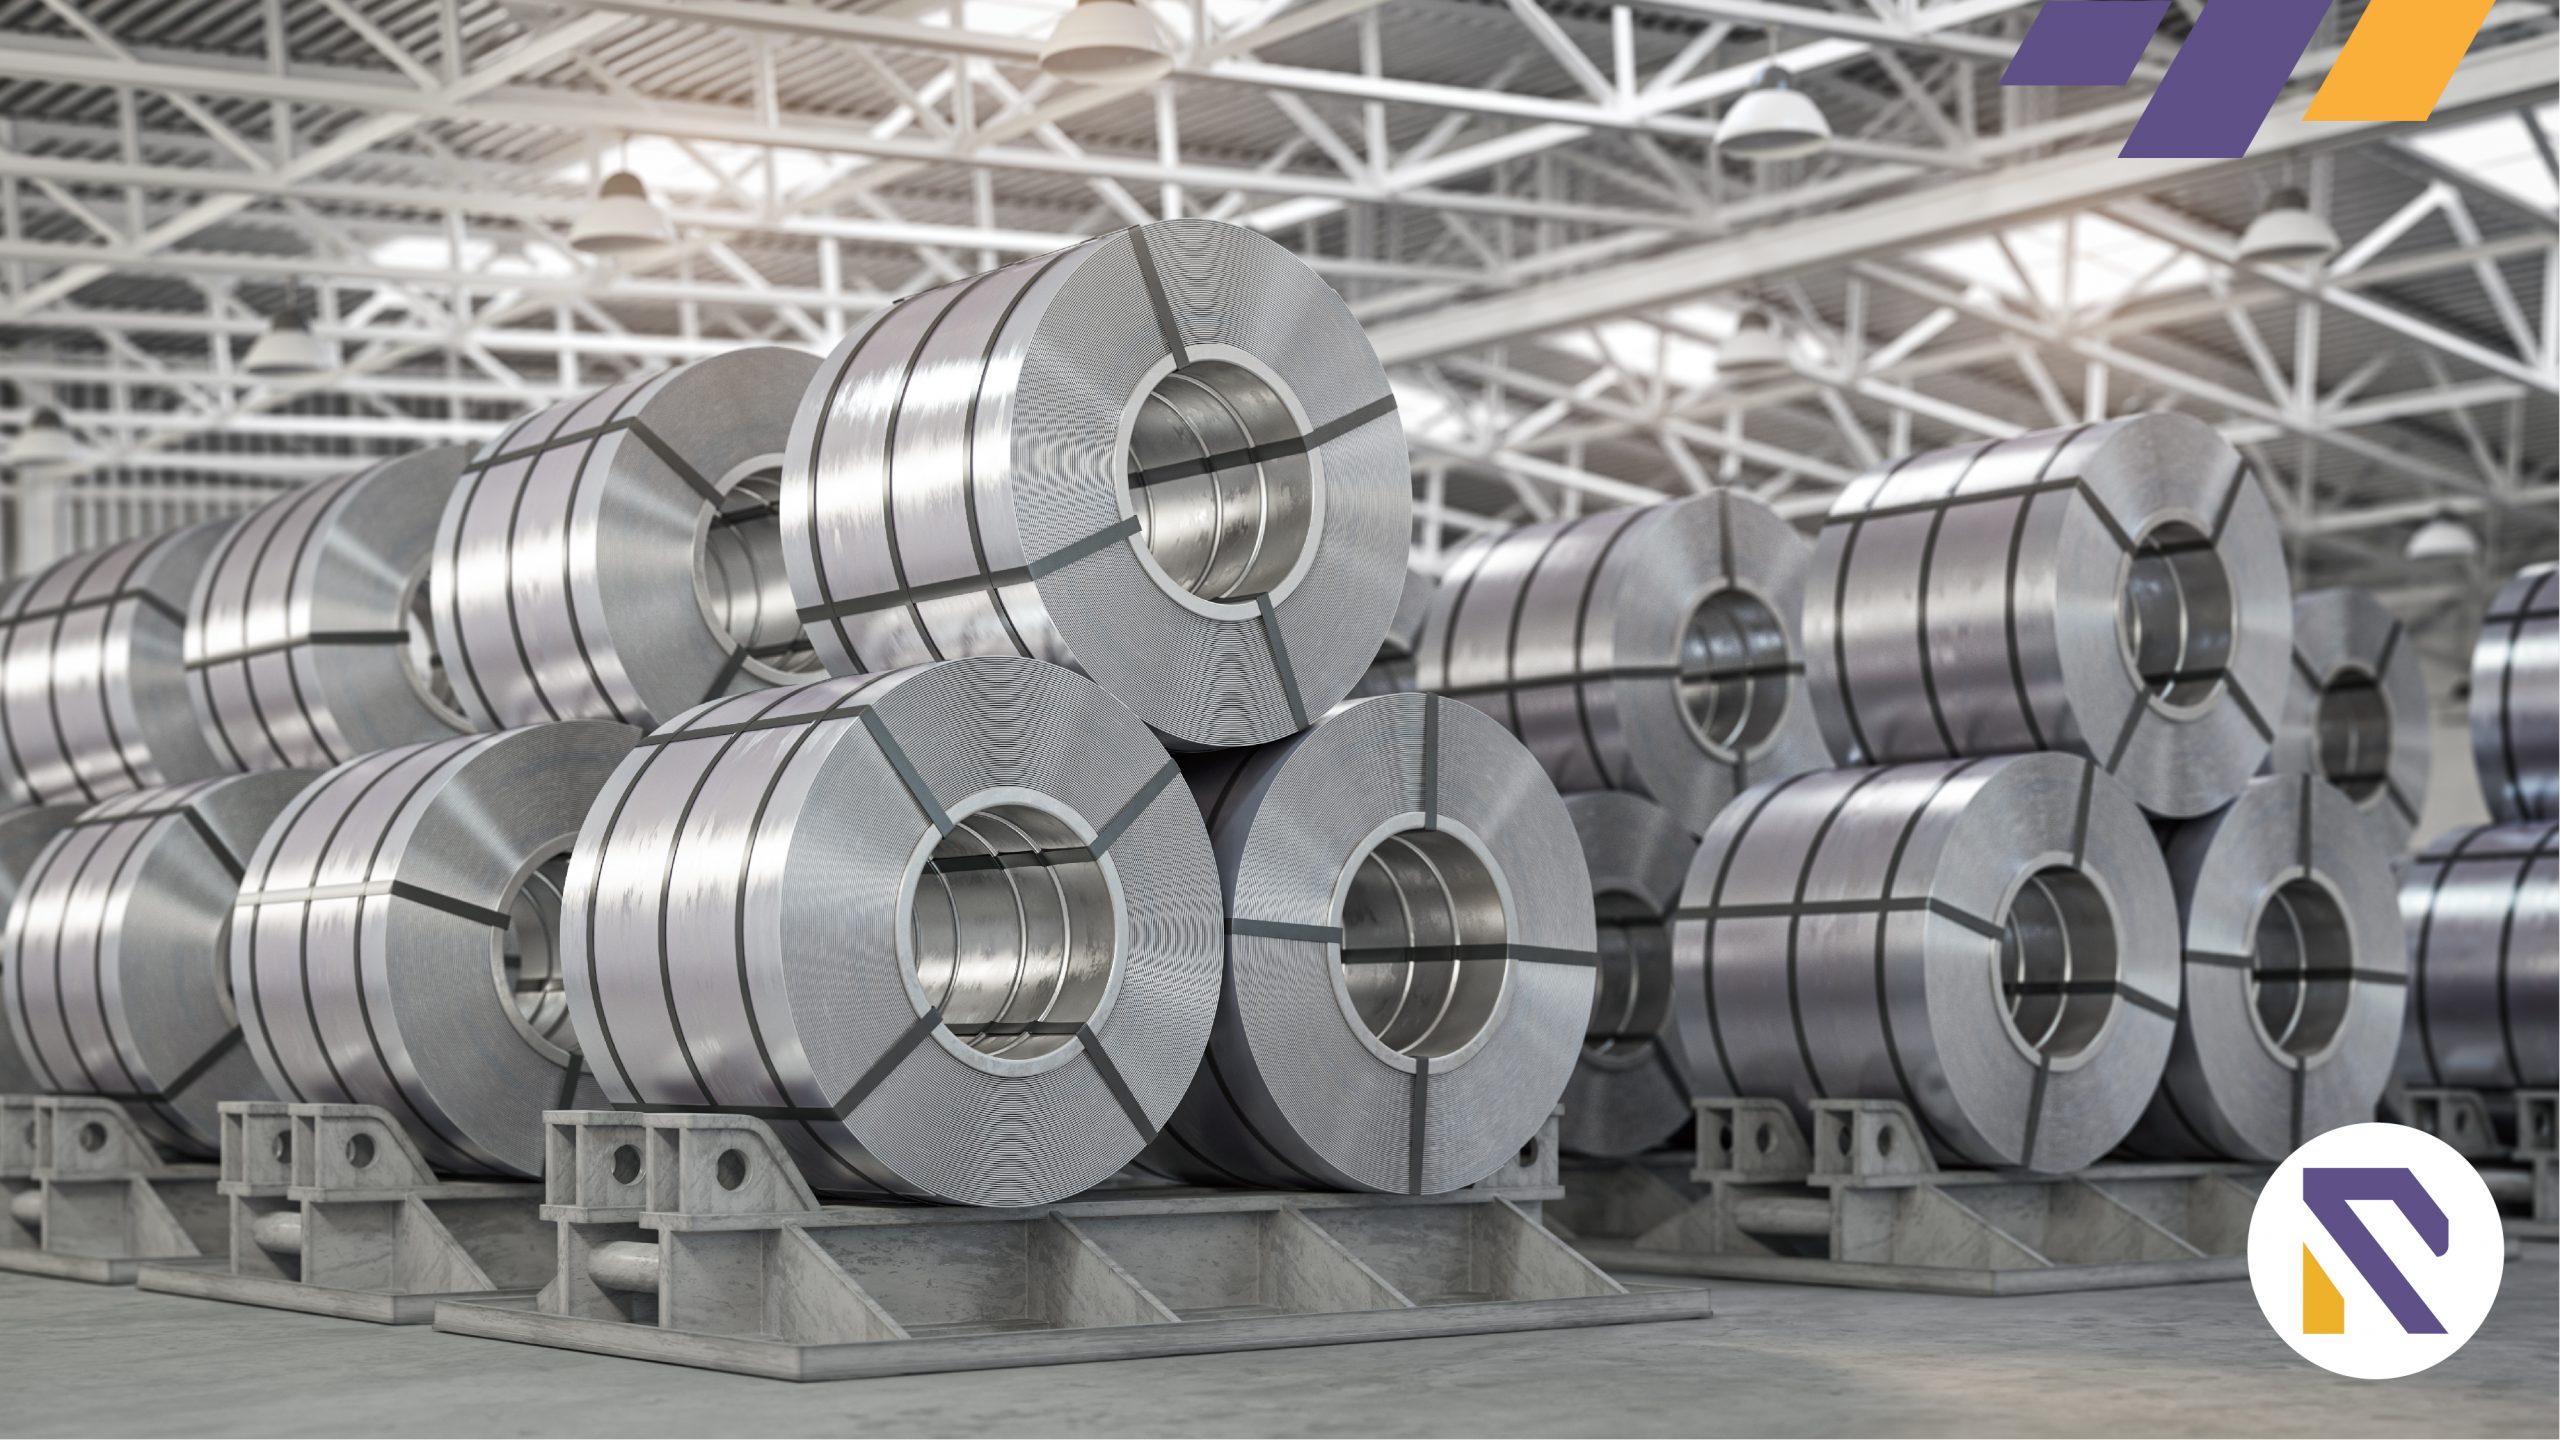 Supply Concerns Rise Amid Soaring Steel Price